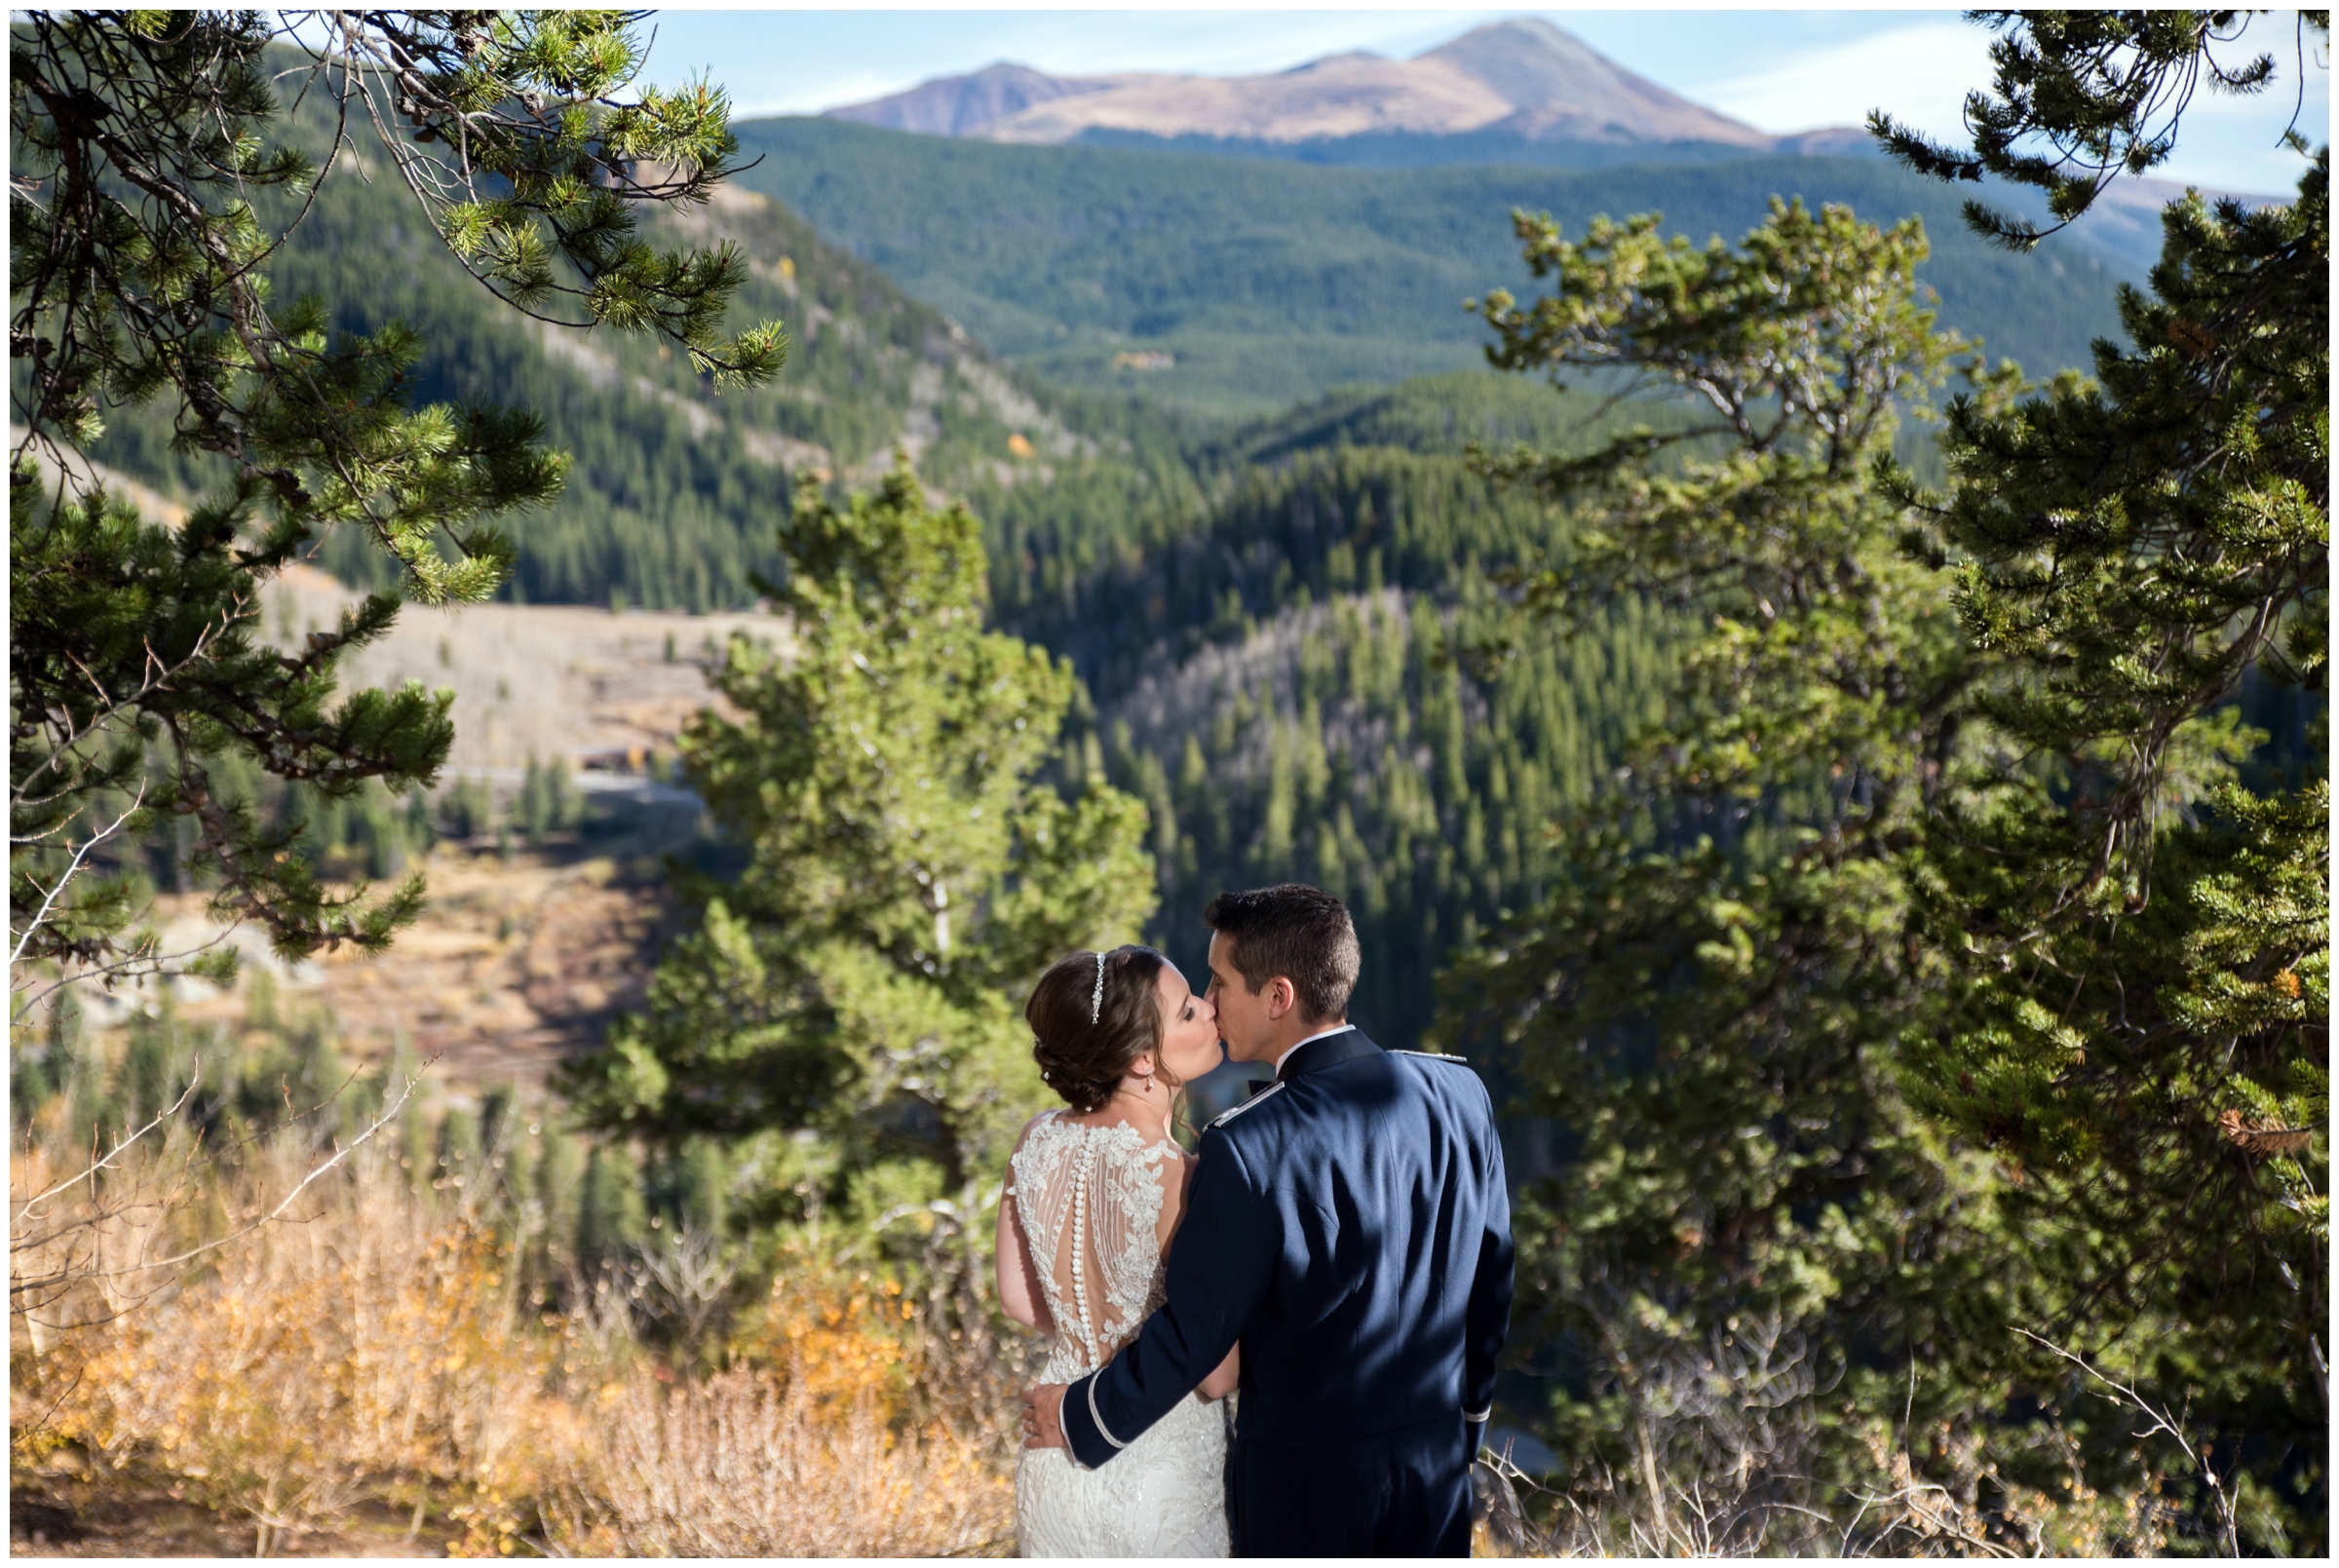 The Lodge at Breckenridge wedding photos by Summit County photographer Plum Pretty Photography. Intimate fall wedding in the Colorado mountains.